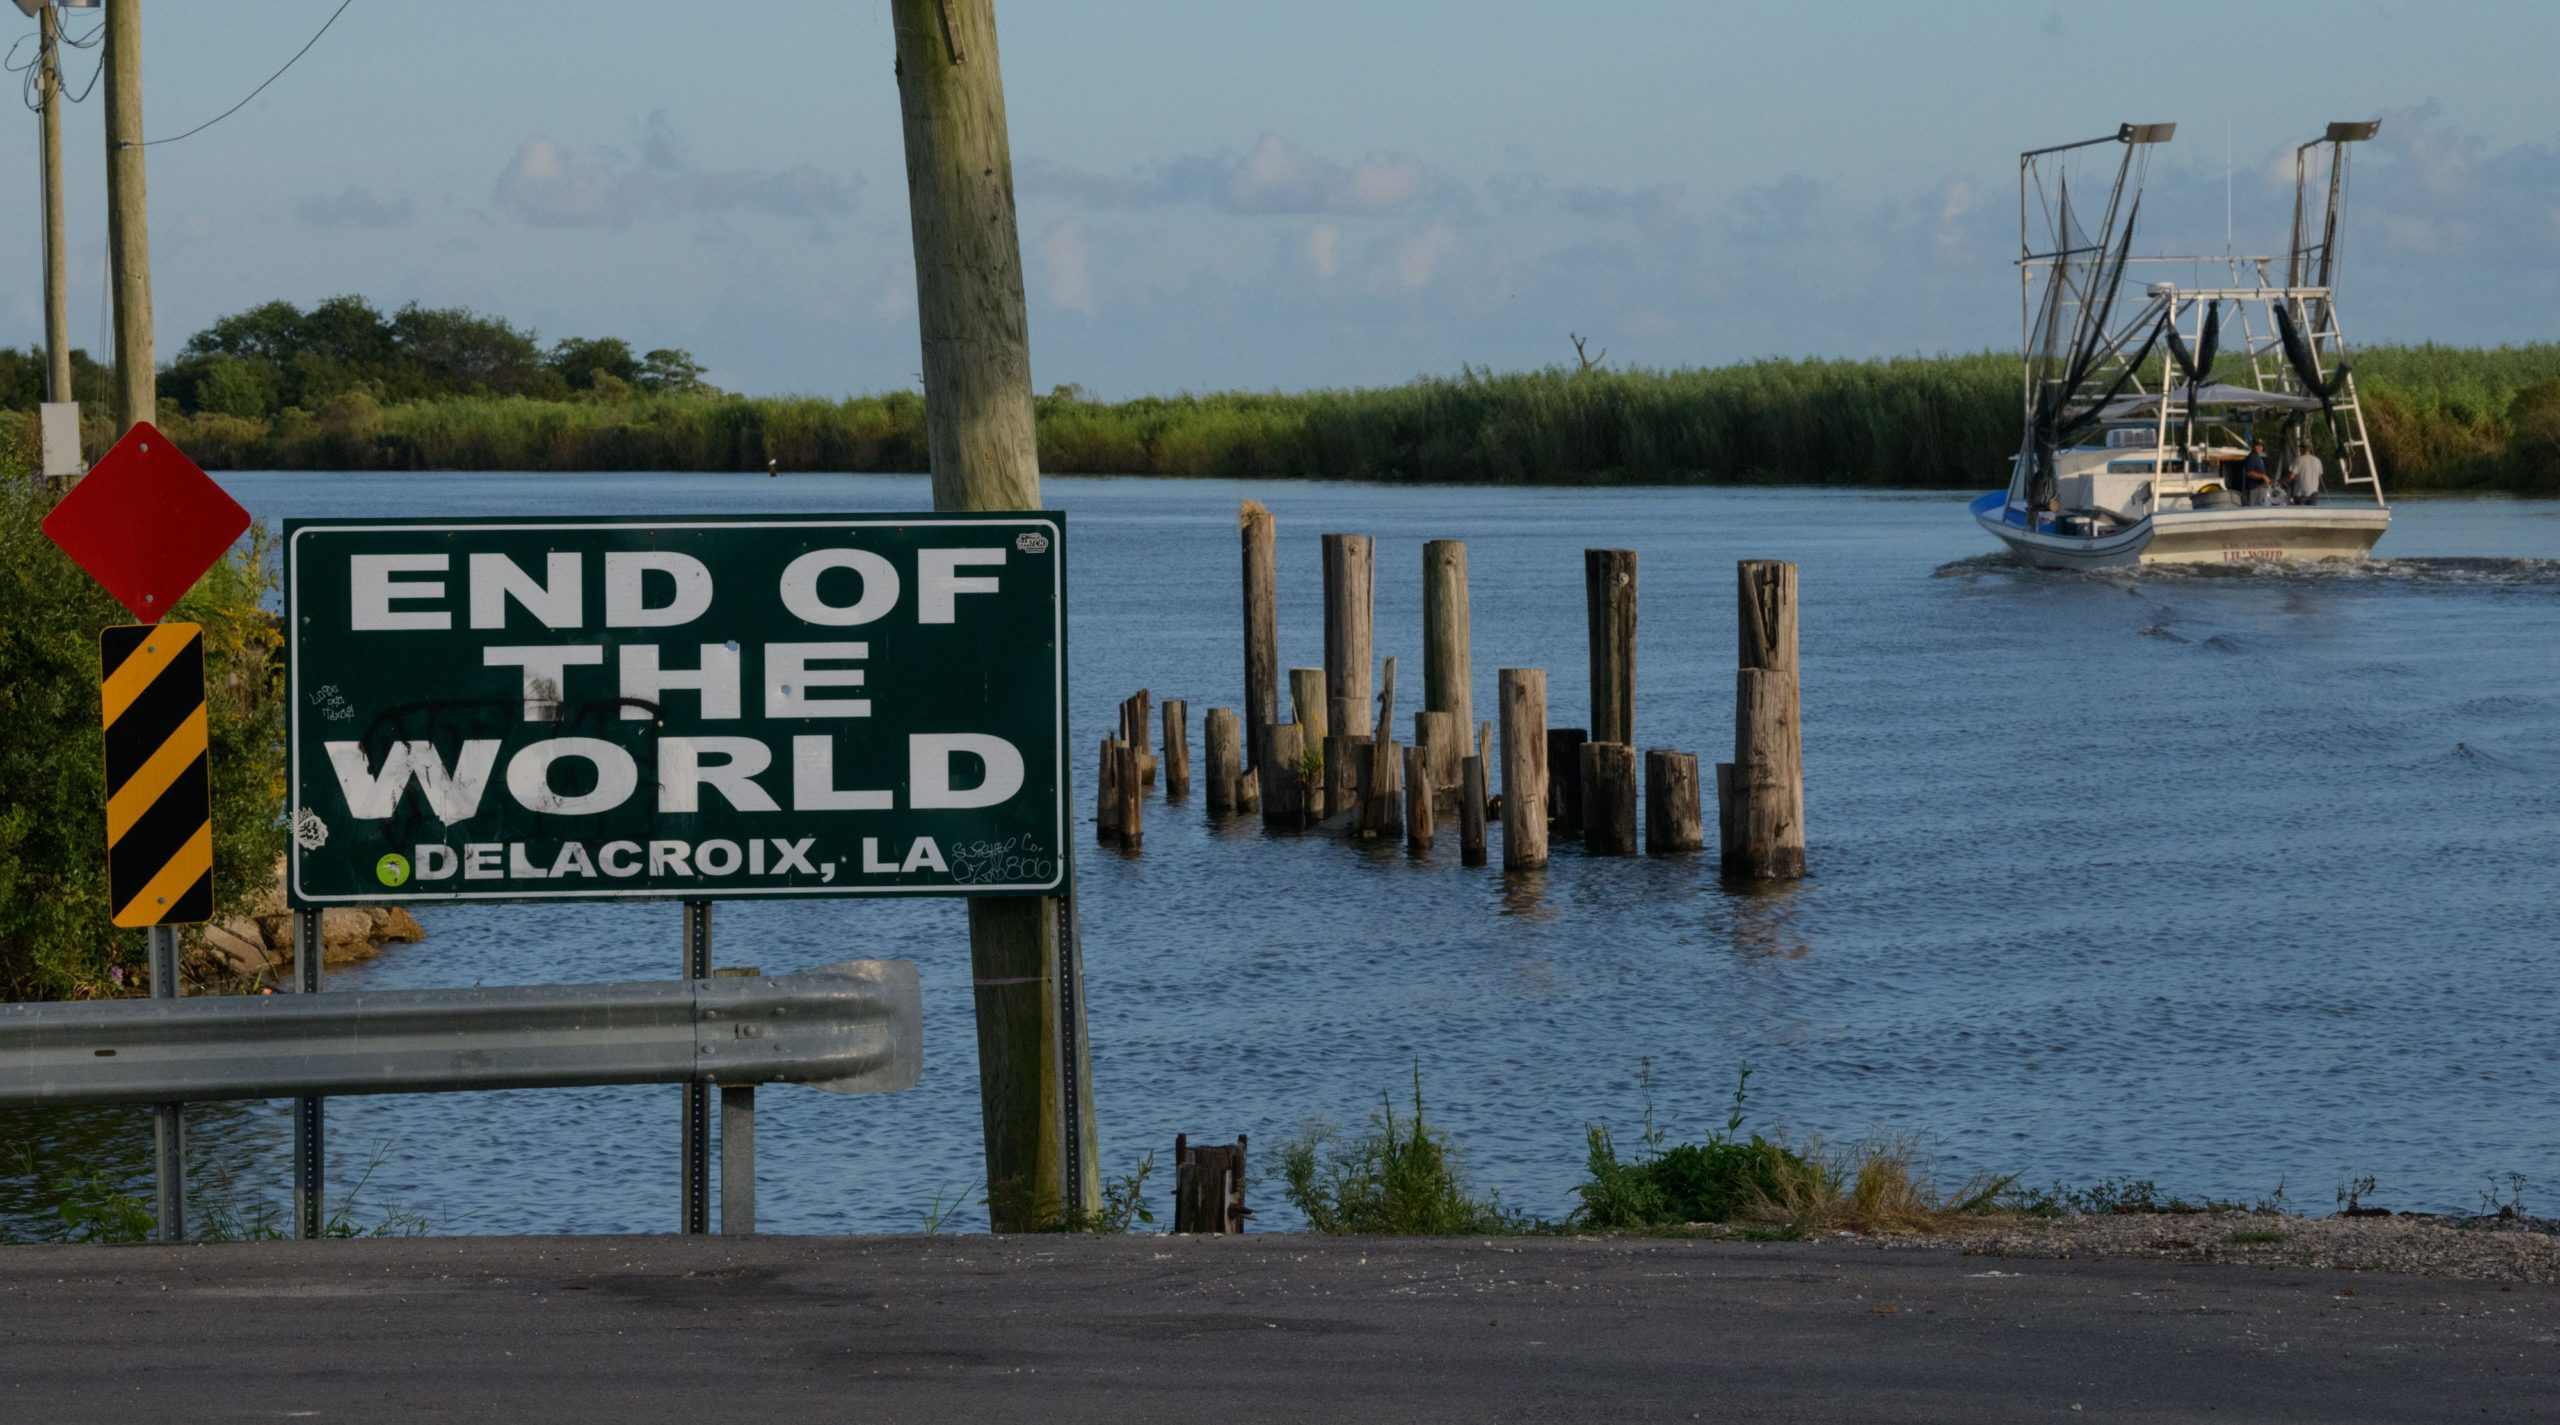 A sign for the End of the World Marina, that was destroyed by Hurricane Katrina, is seen in Delacroix, La. Tuesday, Oct. 15, 2019 as shrimp boat passes. Delacroix was settled by Islenos from the Canary Islands who spoke Spanish and near and interacted with Filipino settlers at the nearby St. Malo platform on Lake Borgne in 1800s. Photo by Matthew Hinton